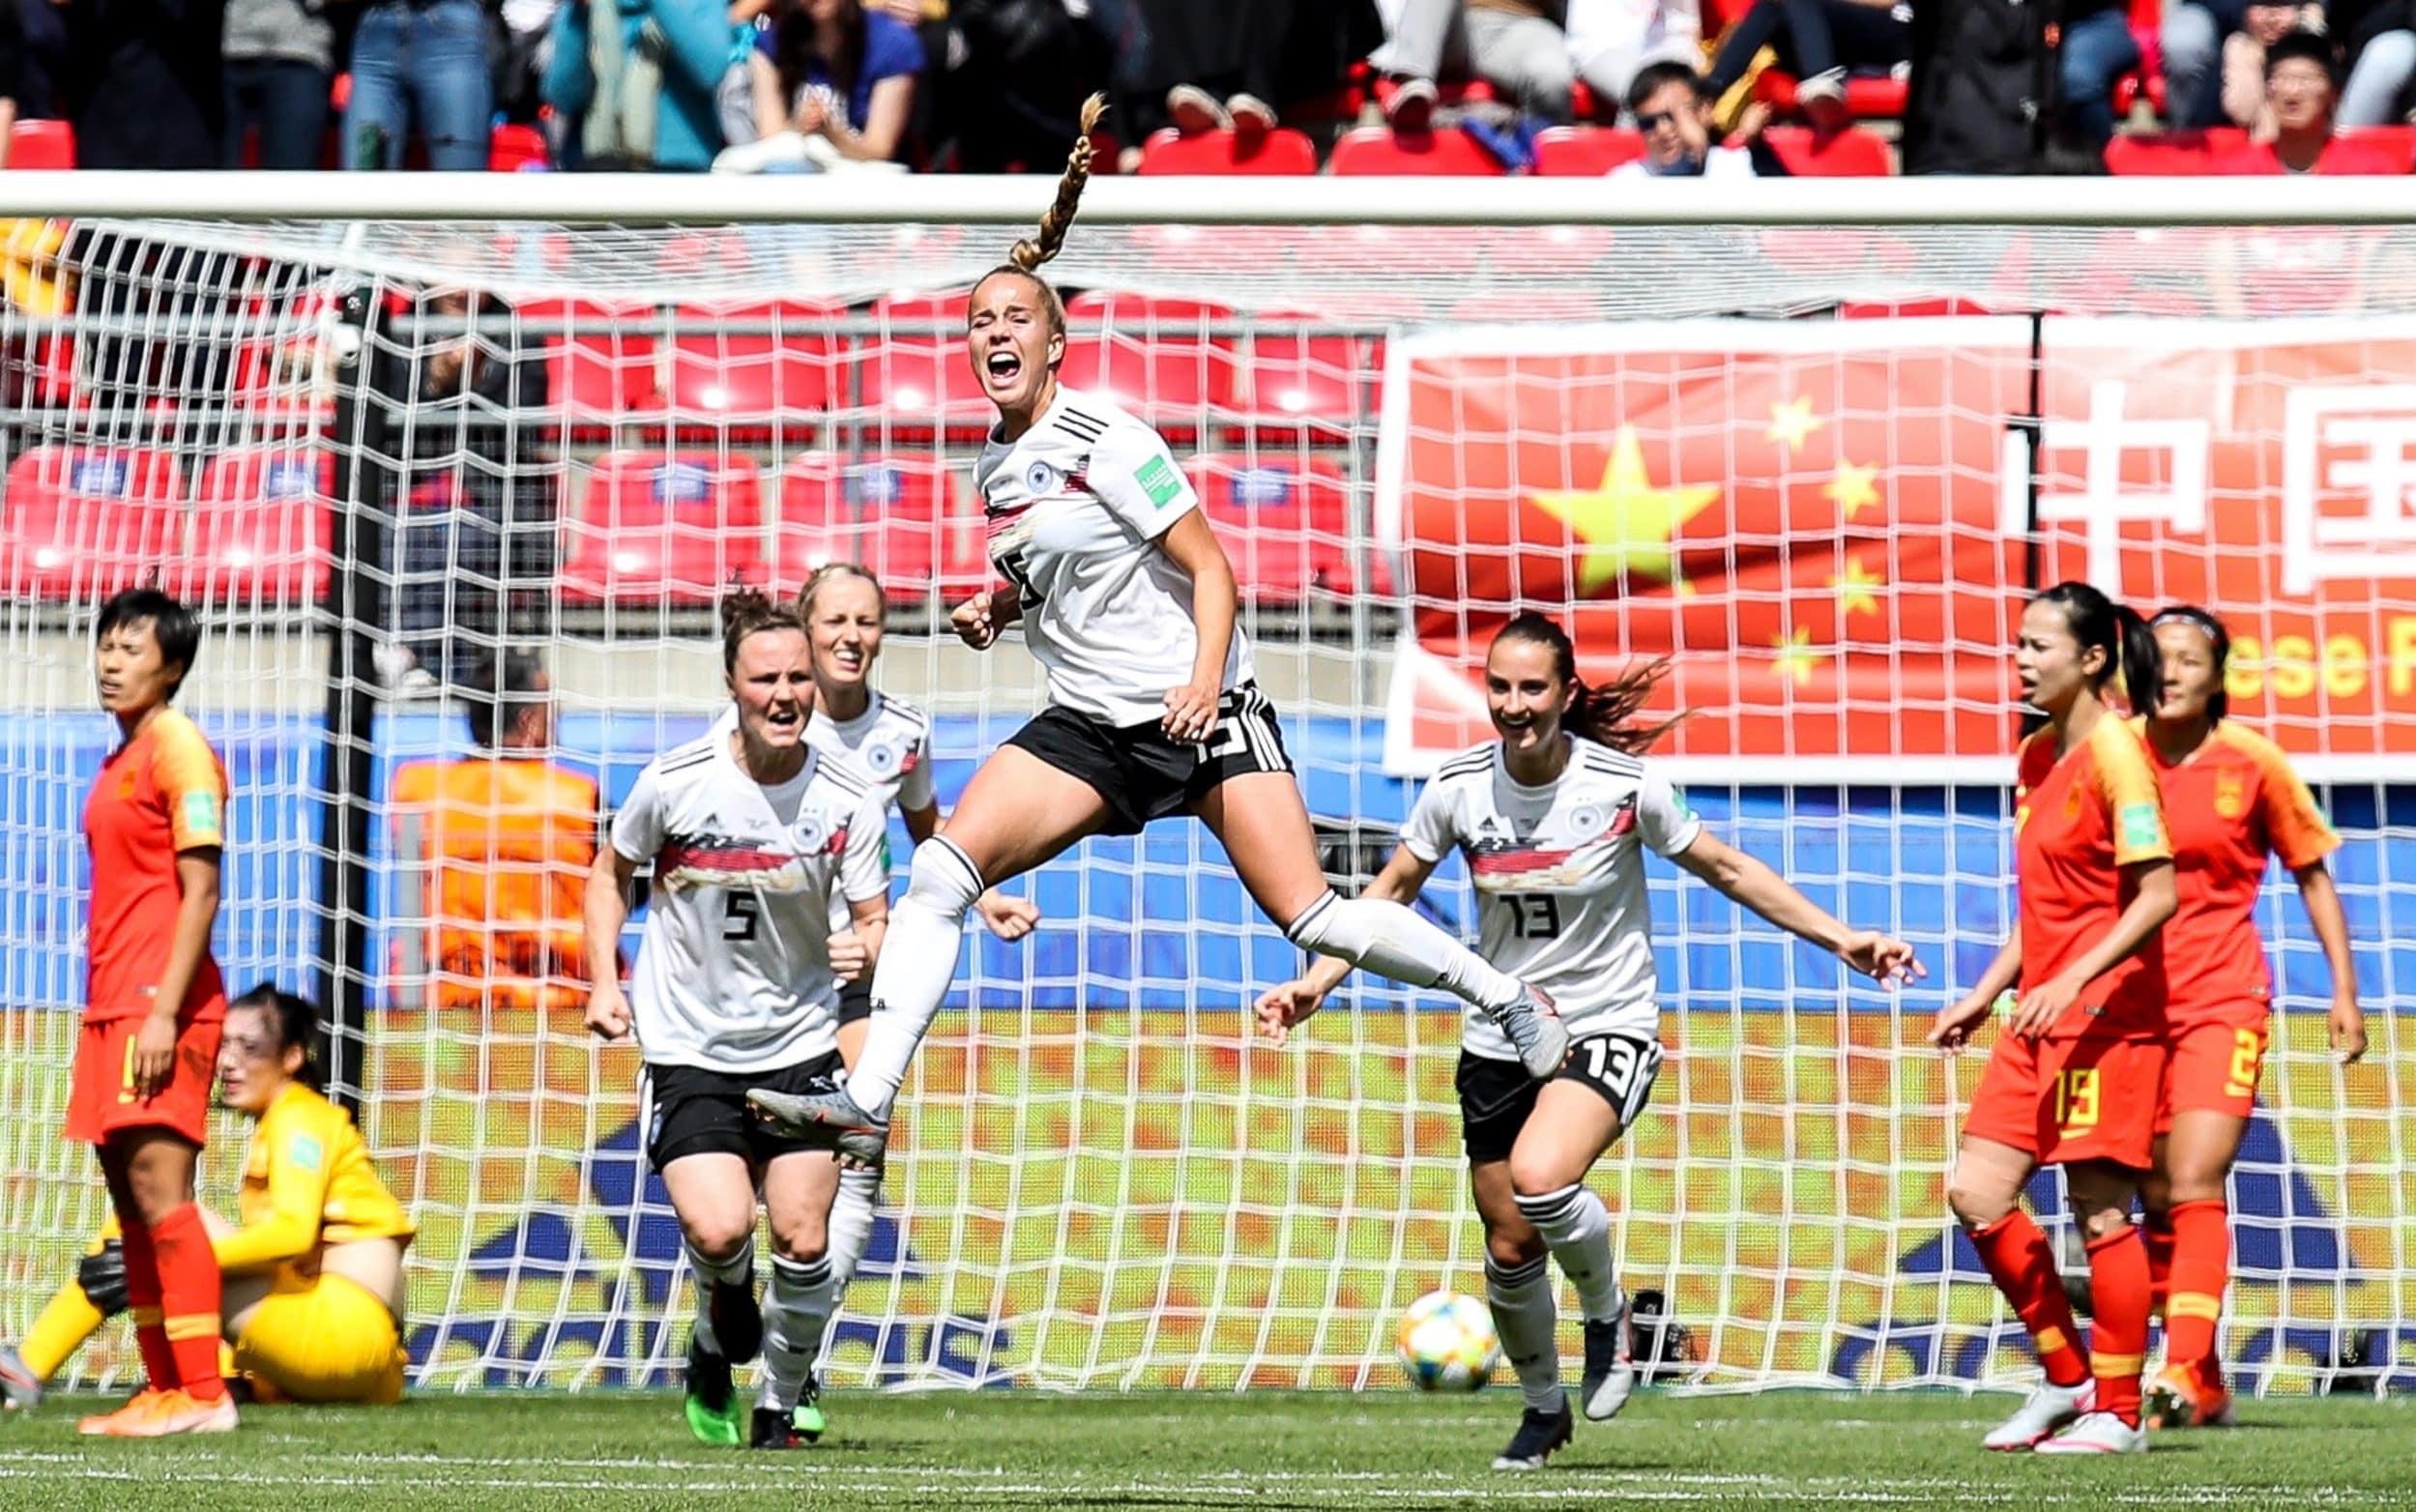 Women's World Cup 2019 fixtures: Knockout round schedule and results